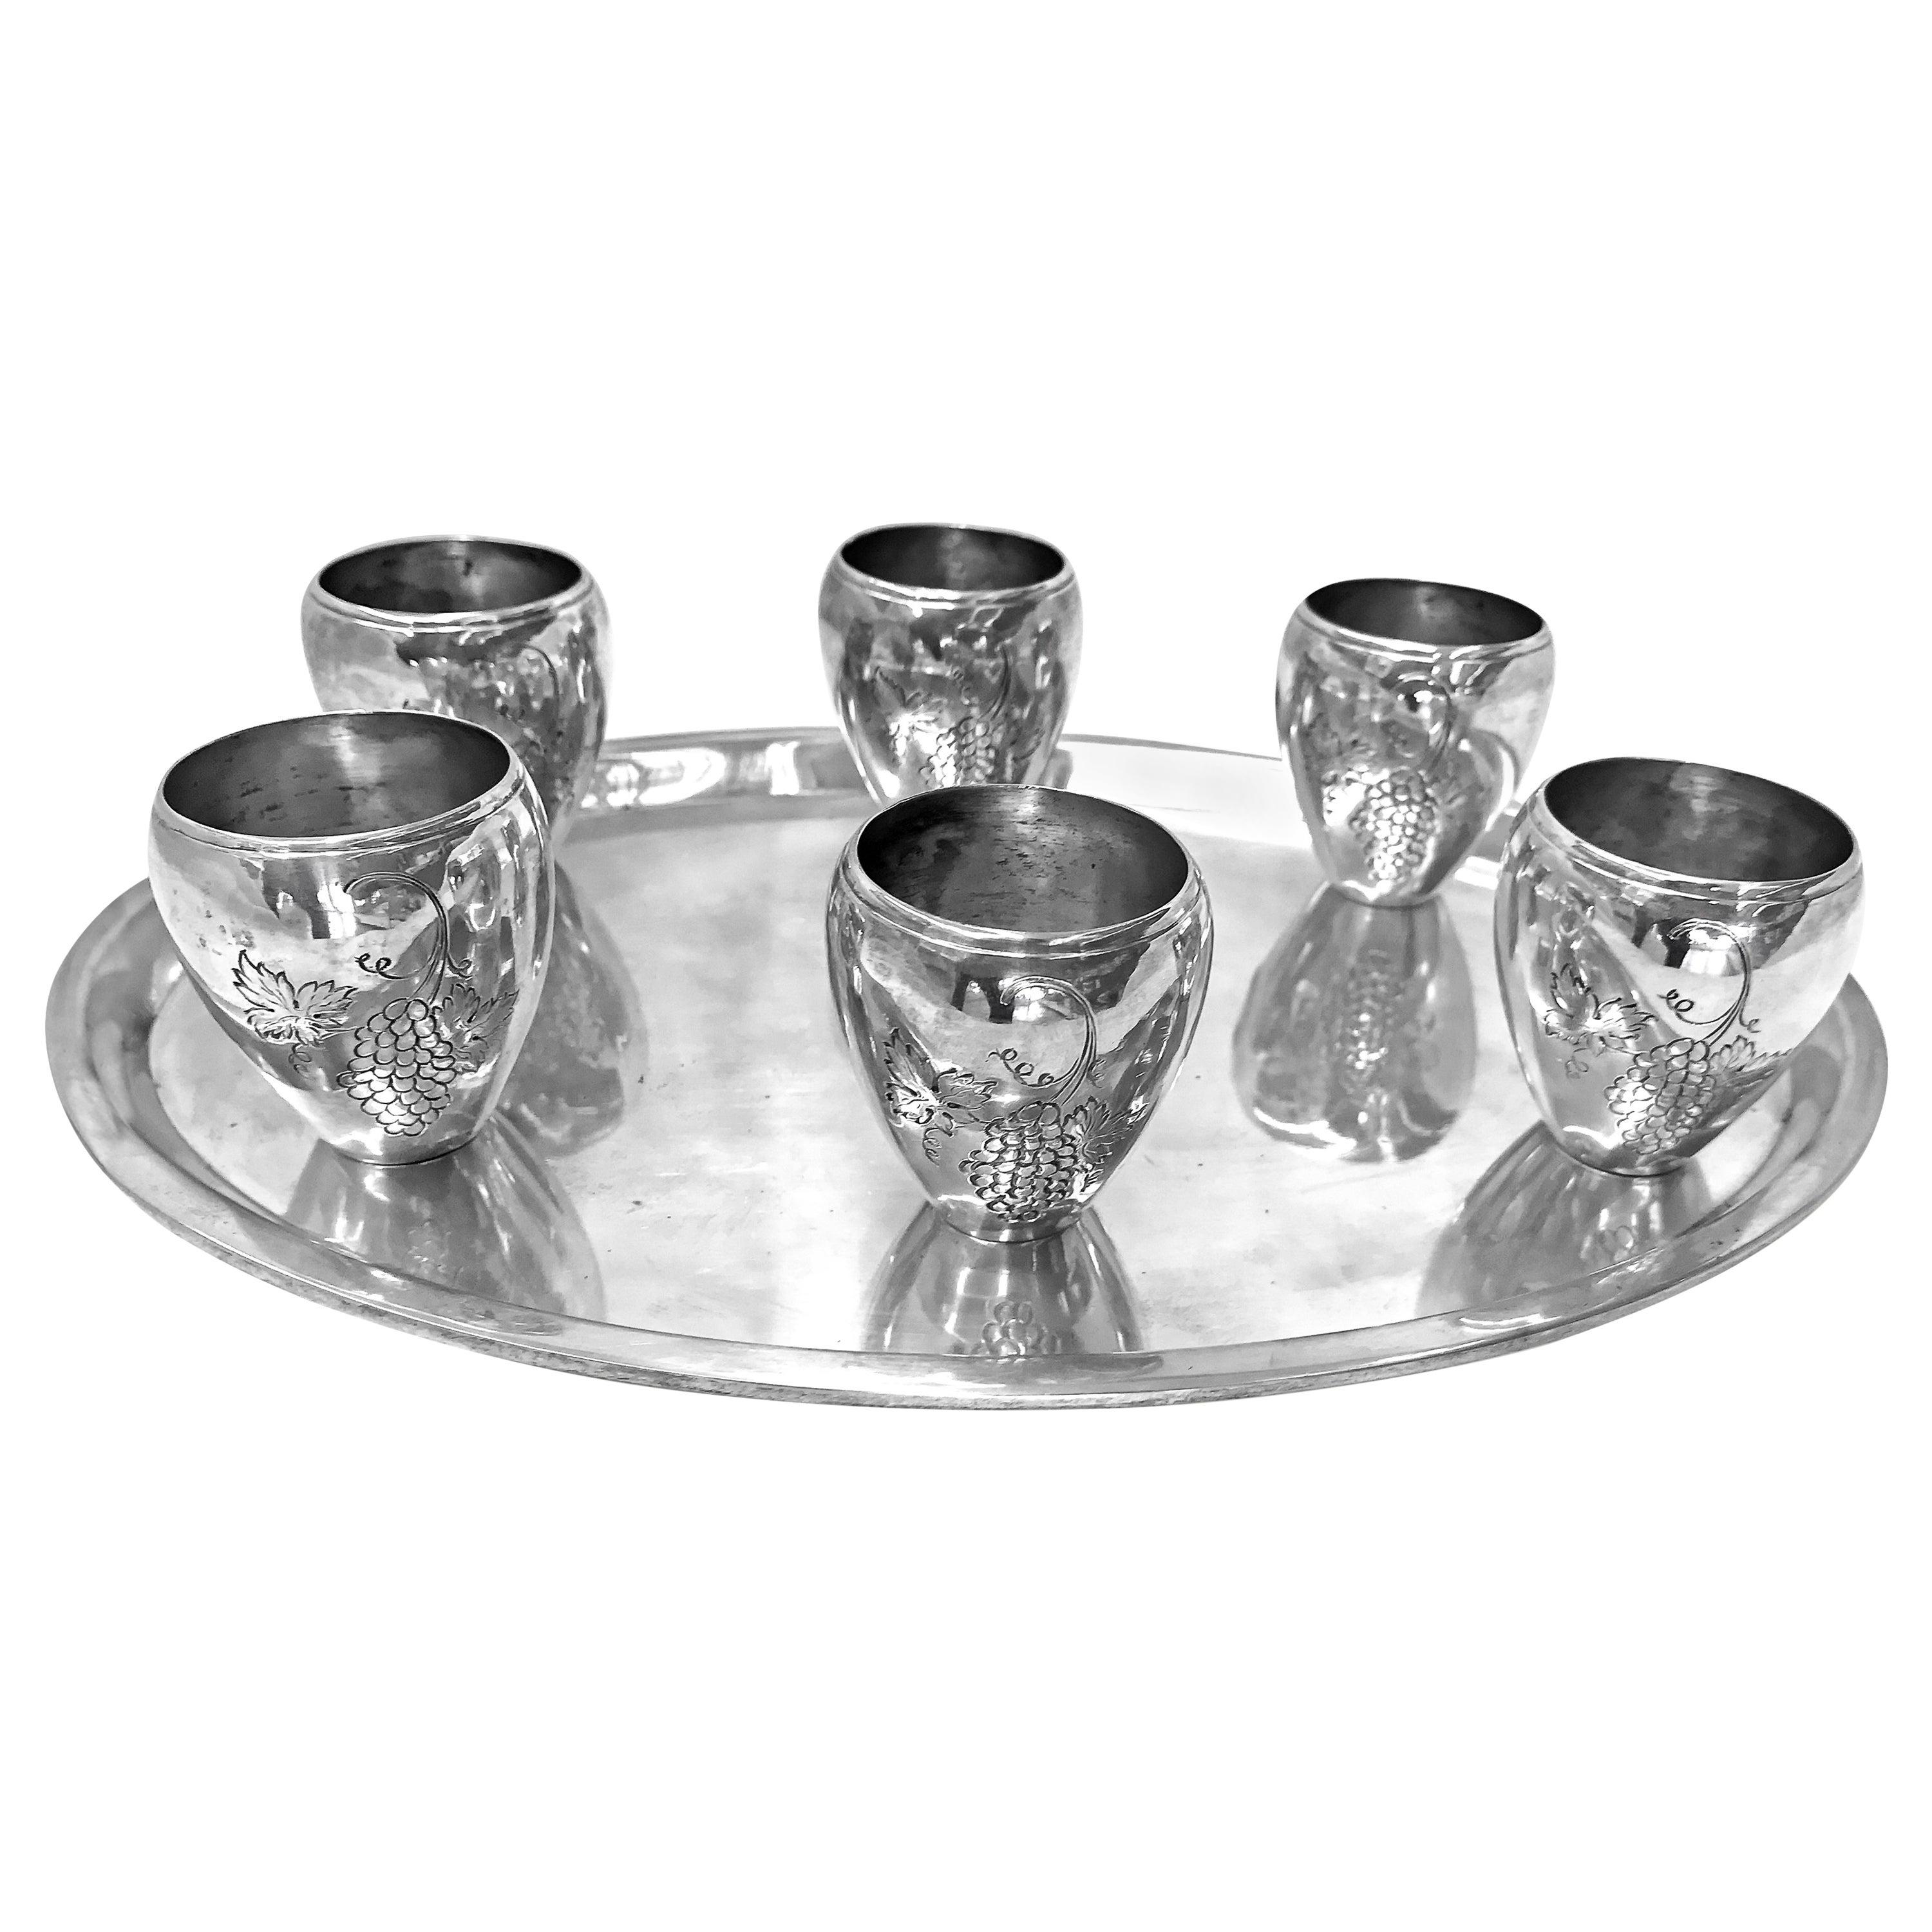 Unique Sterling Silver Liquor Set of 6 Cups and 1 Oval Tray For Sale